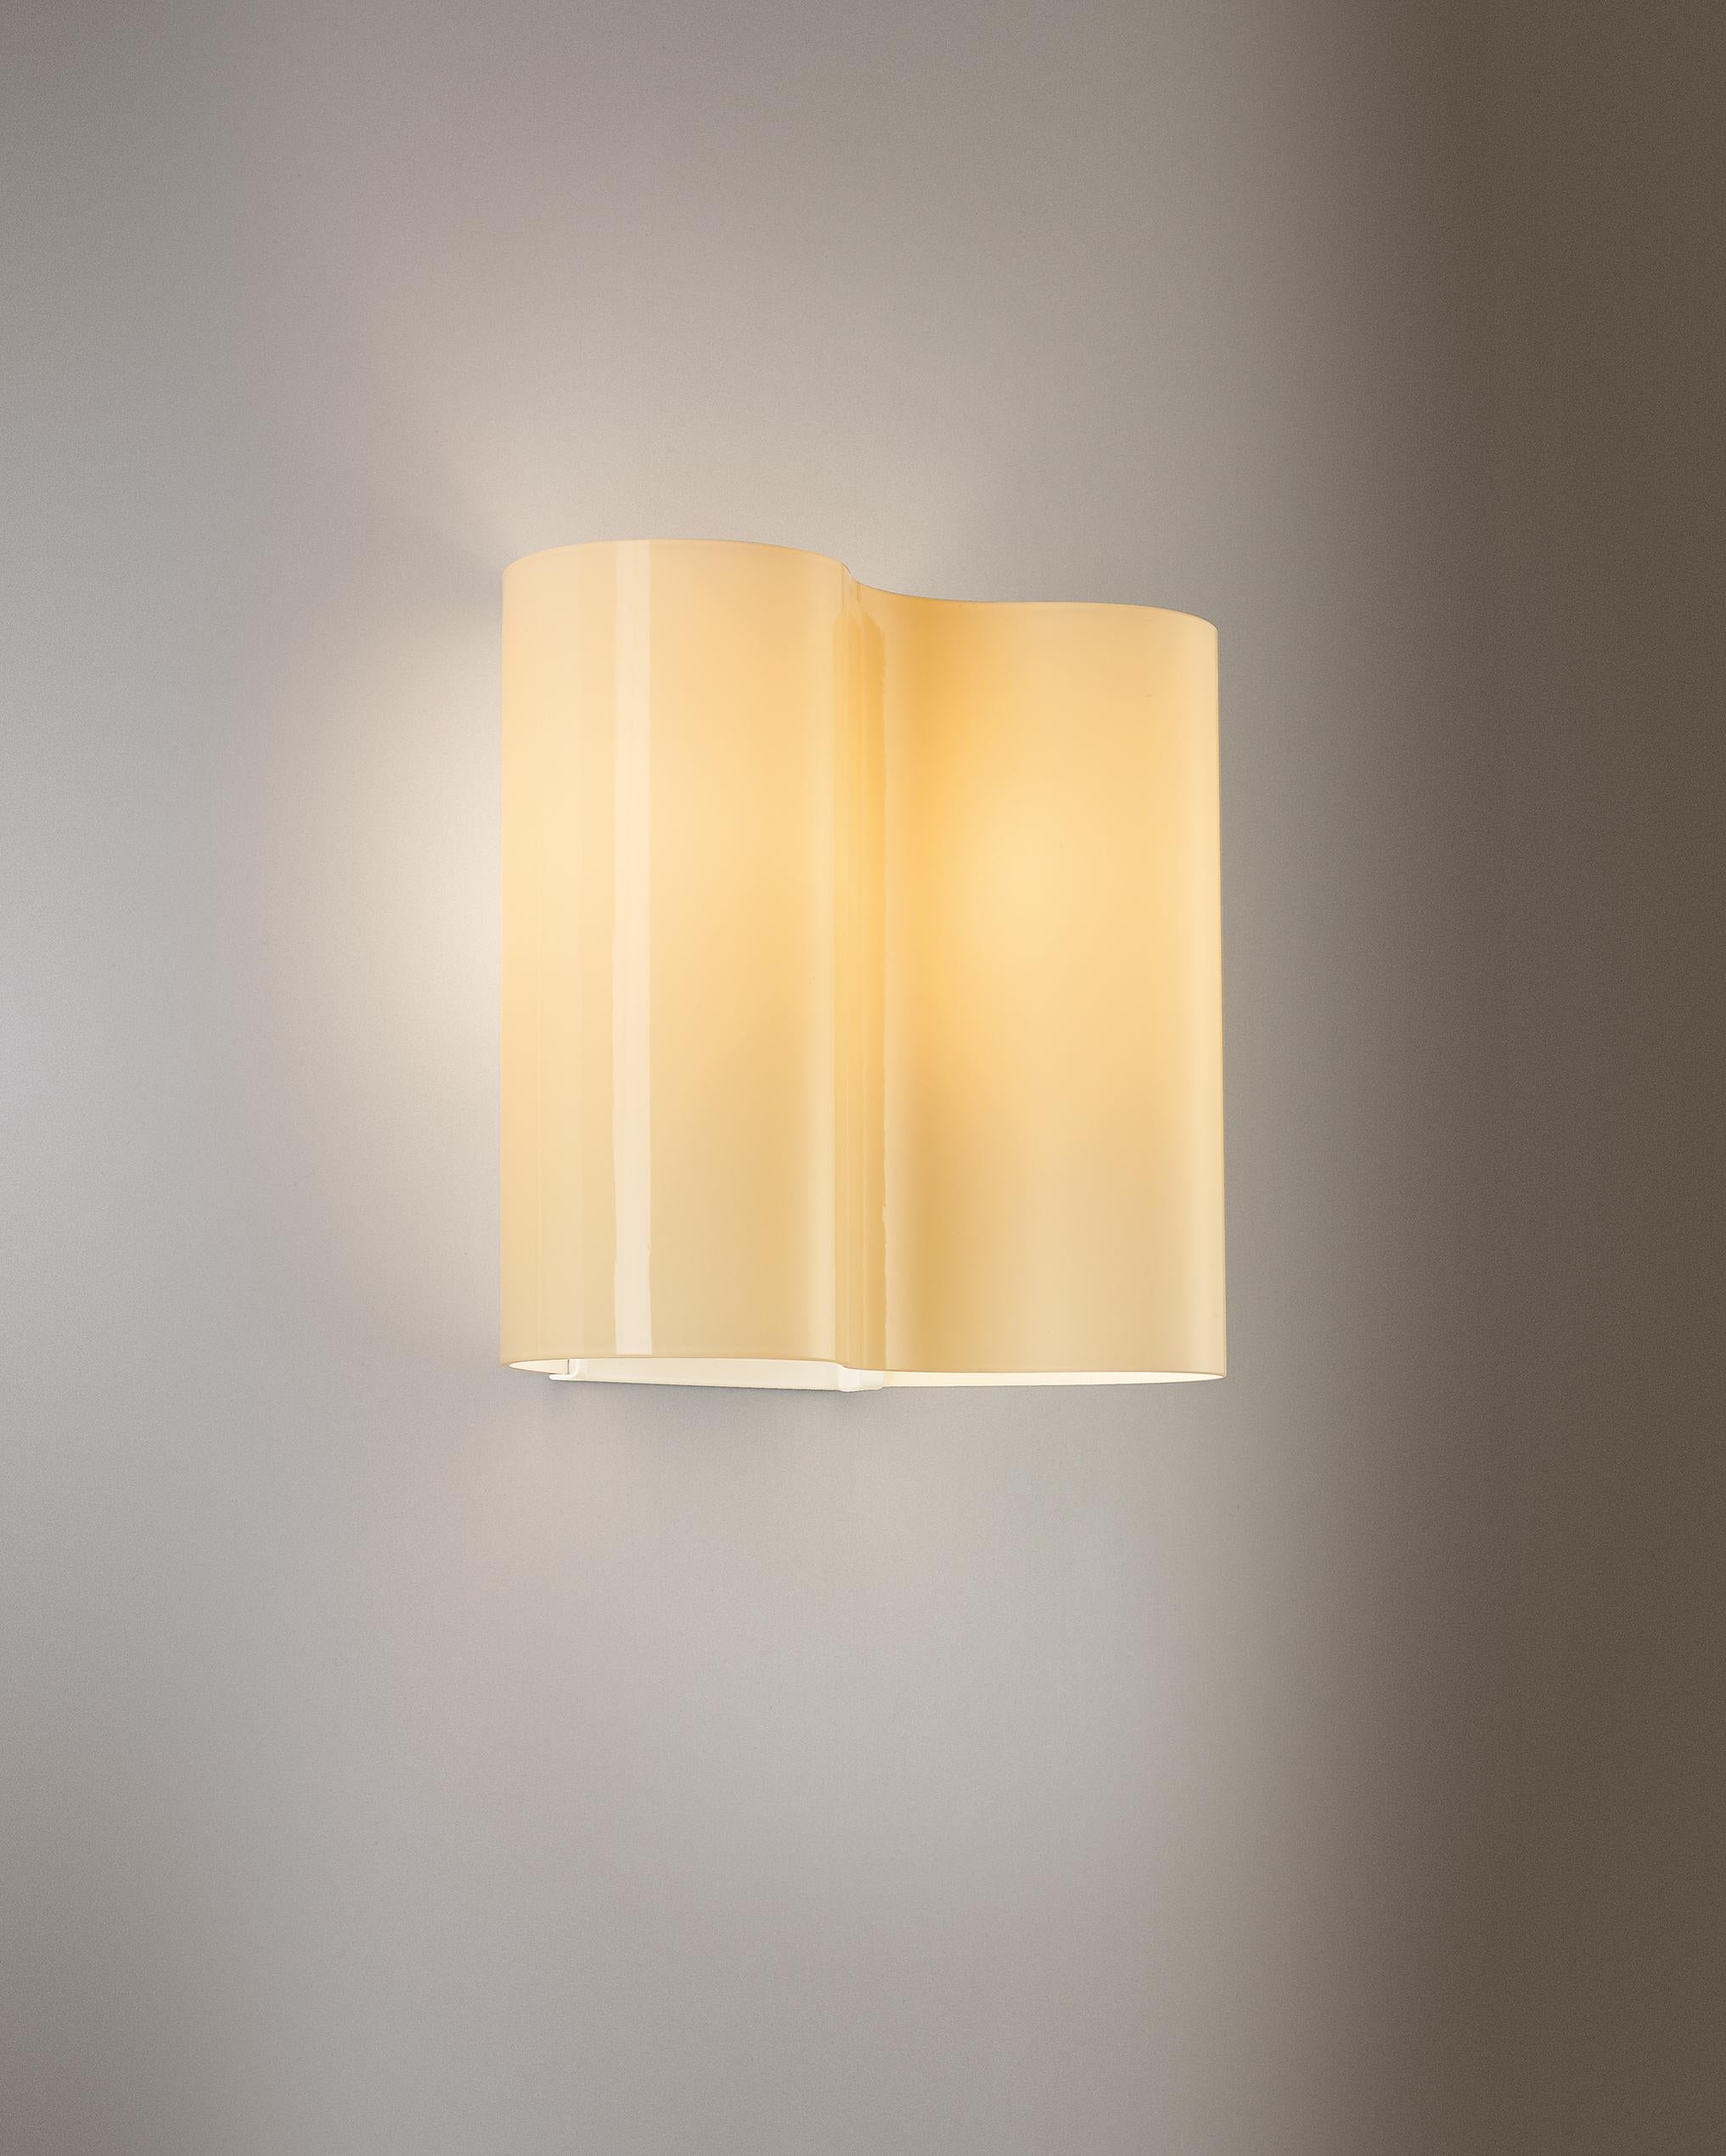 Wall lamp with indirect and diffused light. Hand blown cased glass diffuser achieved using glass blowing procedure without turning the glass in the mold (referred to as 